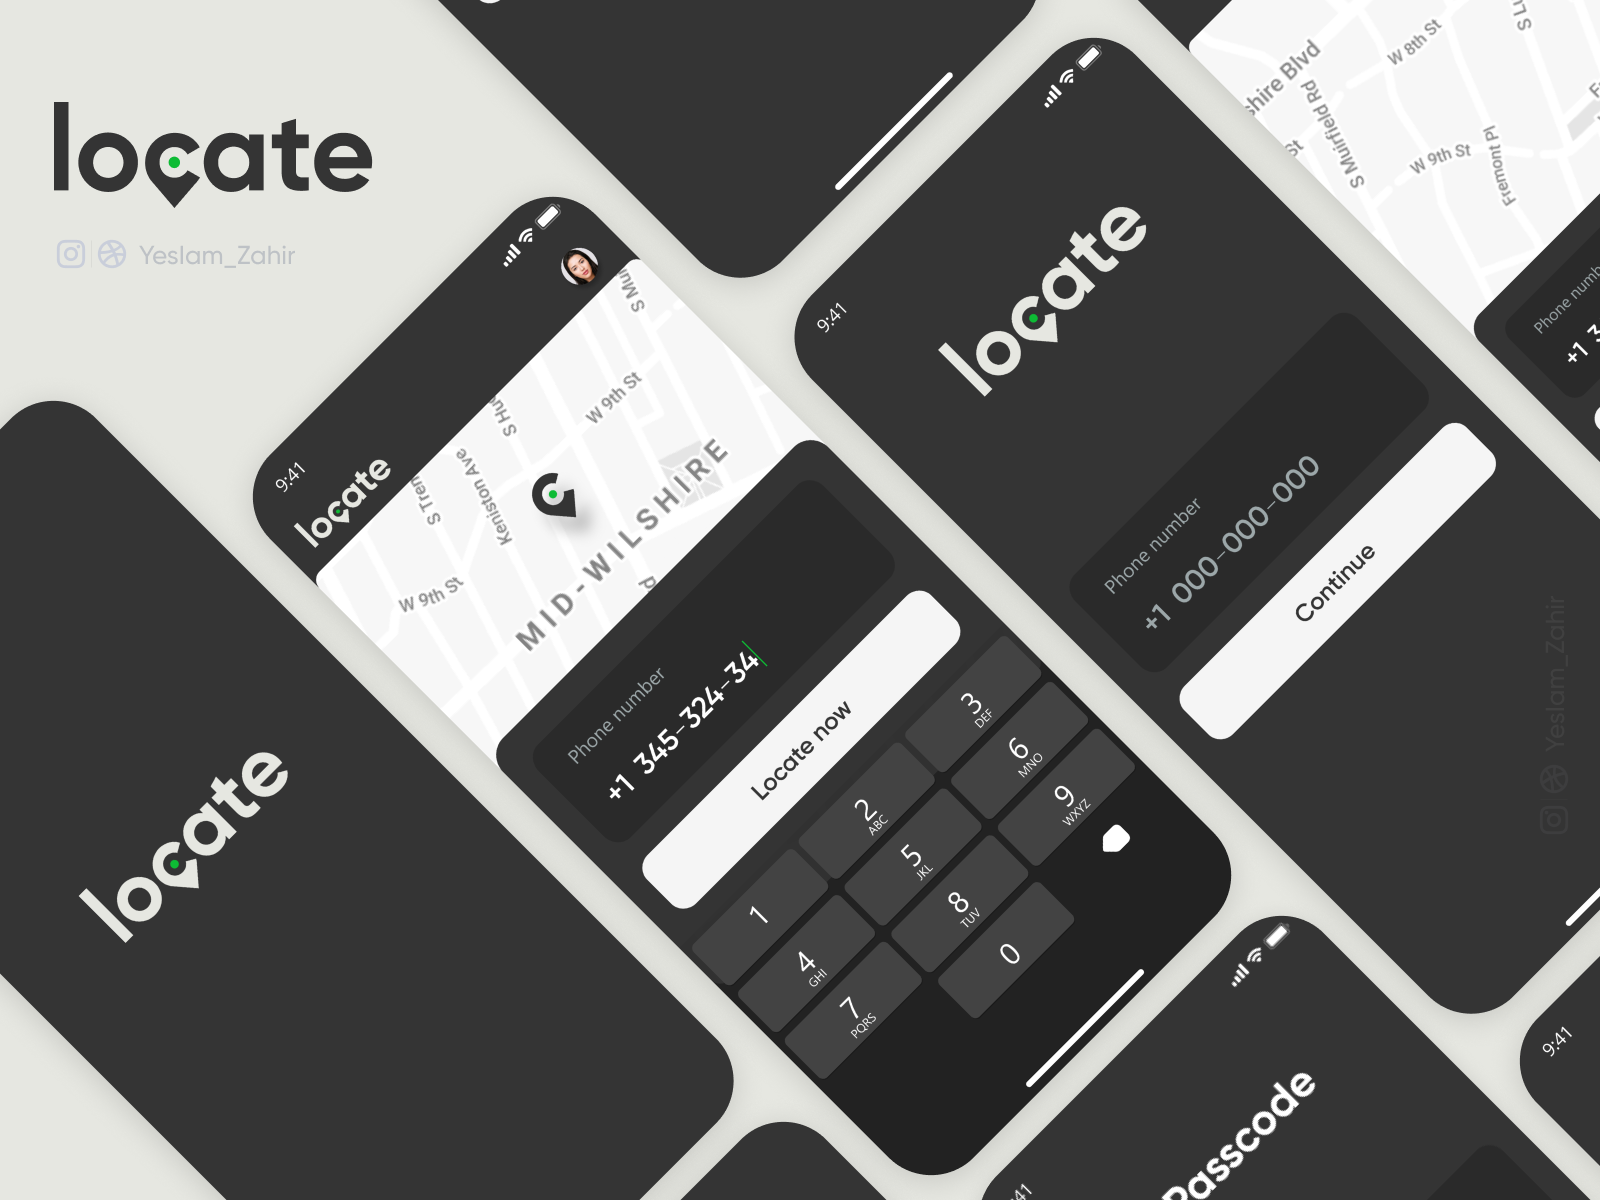 Locate | Phone Number Location Tracker by Zahir patel on Dribbble